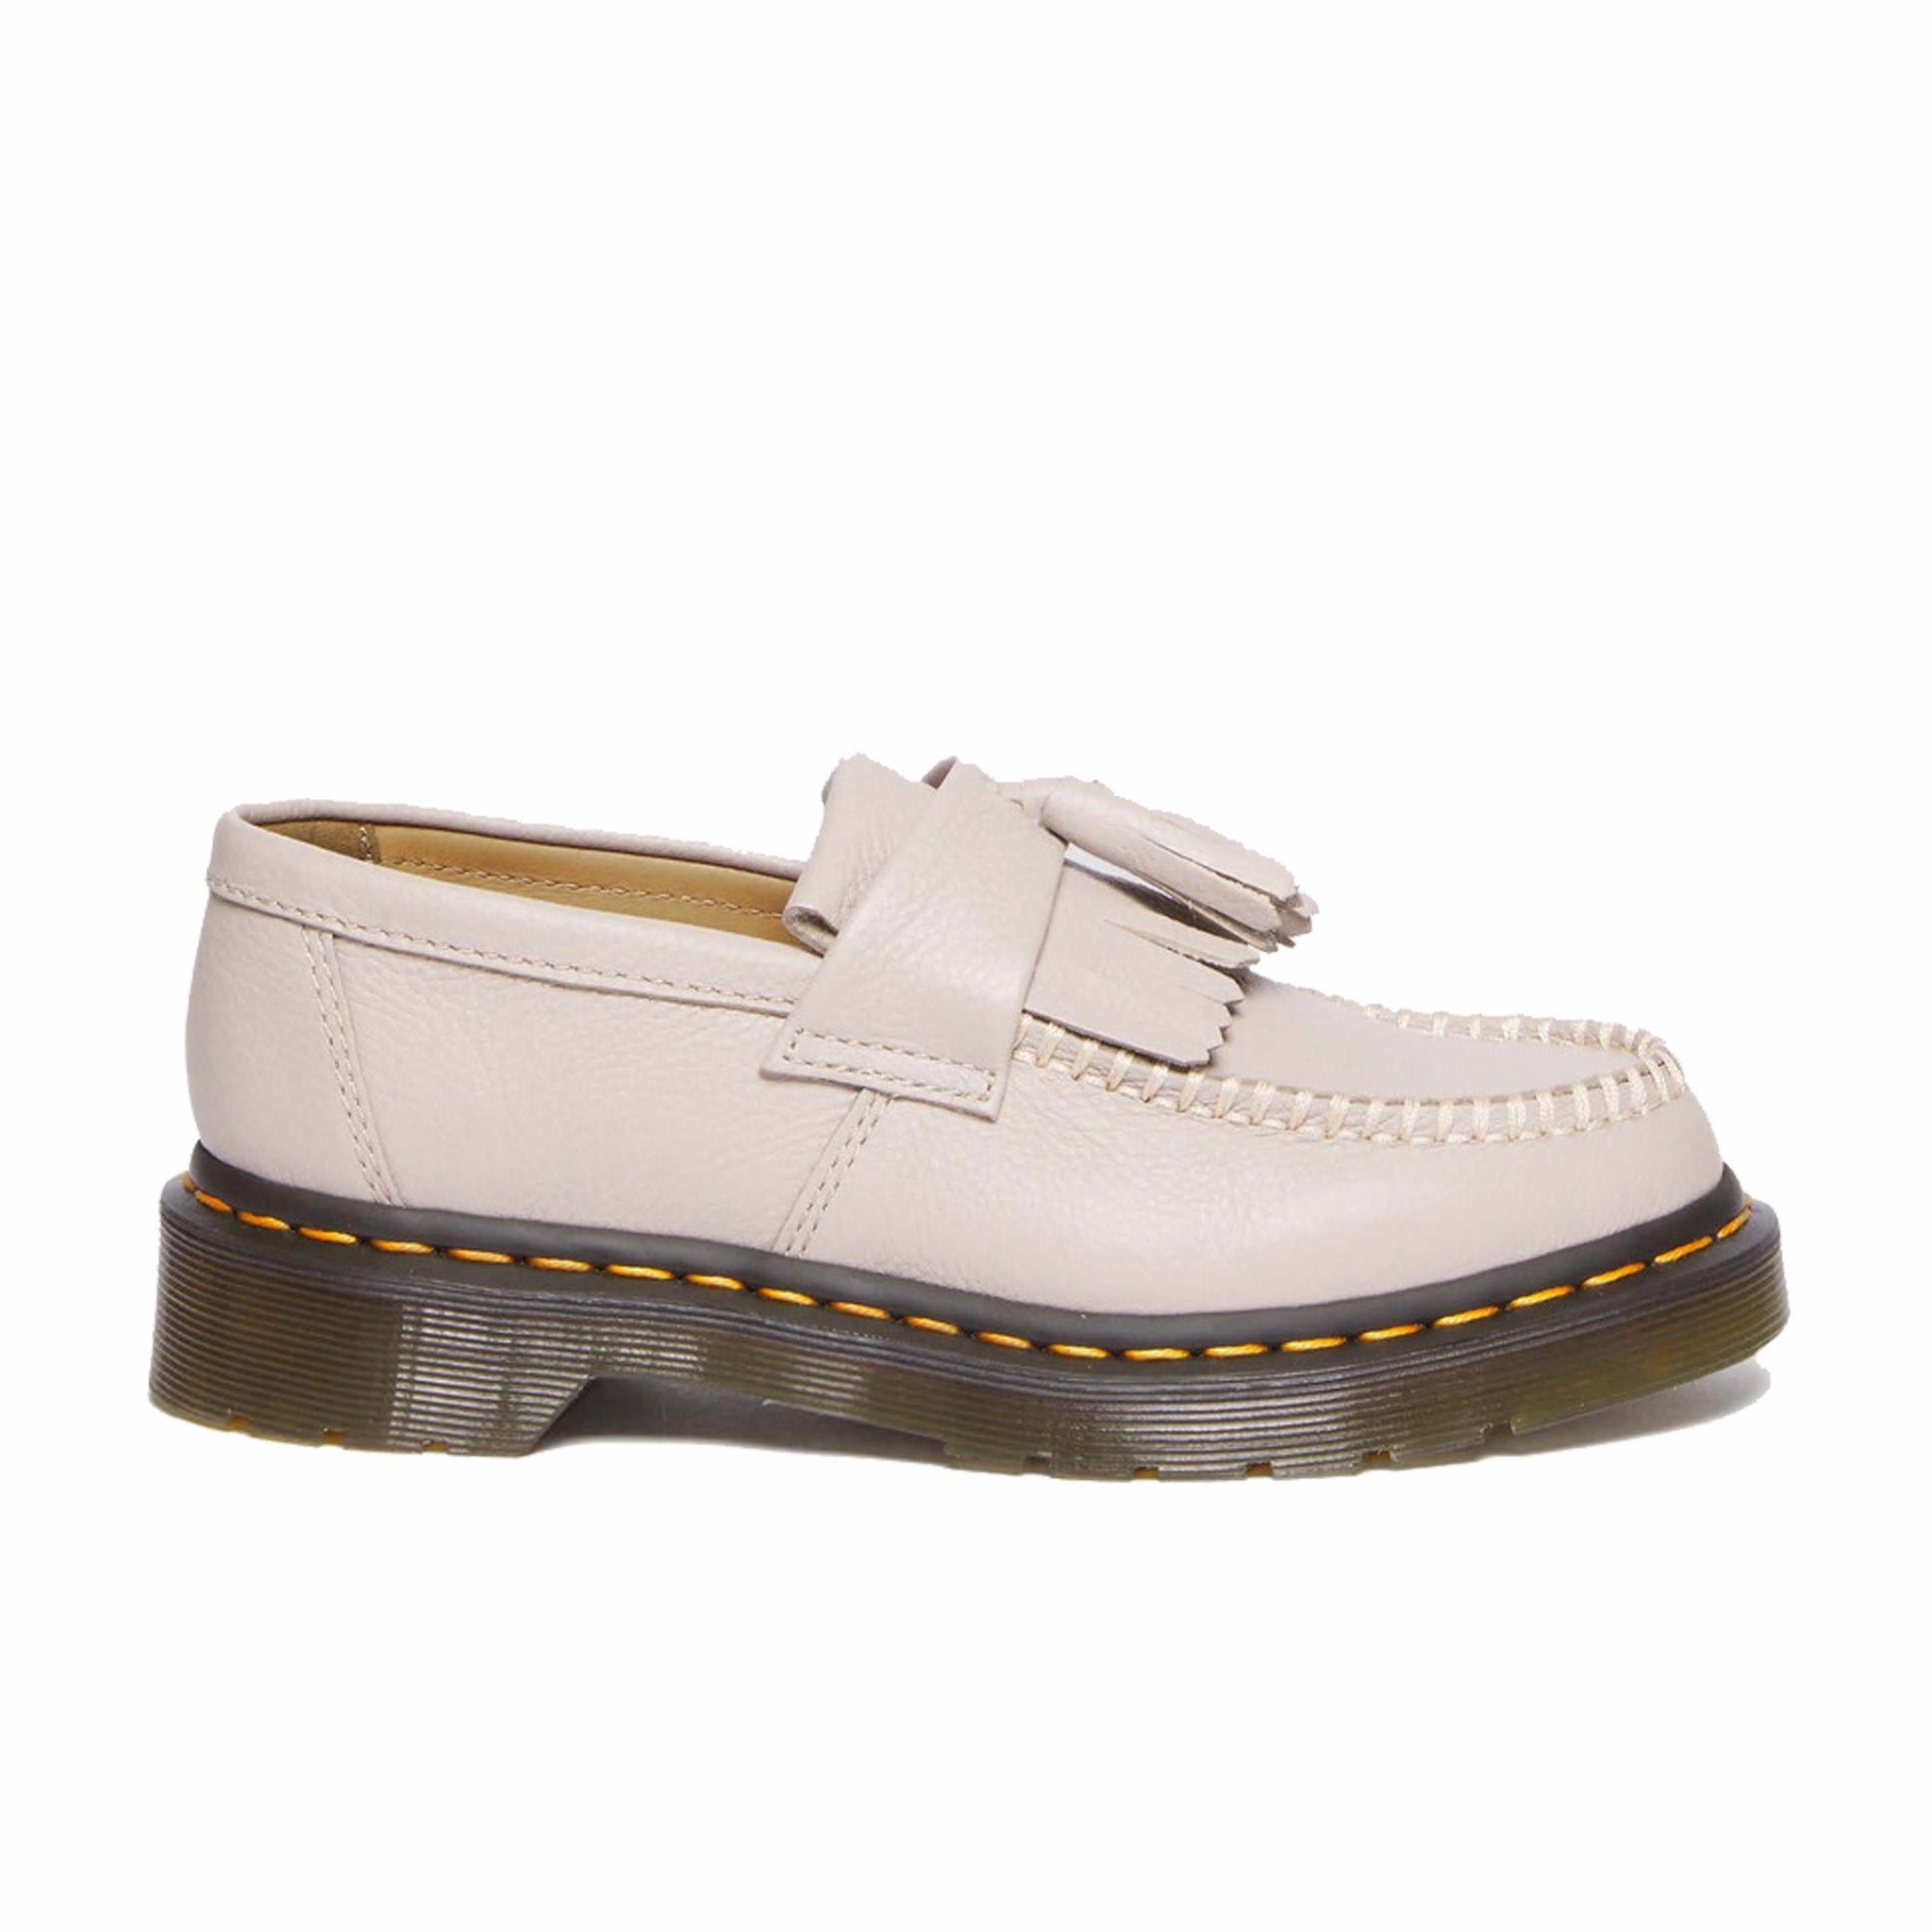 Dr. Martens Women’s Adrian Virginia Leather Tassel Loafers (Vintage Taupe/Virginia) - August Shop